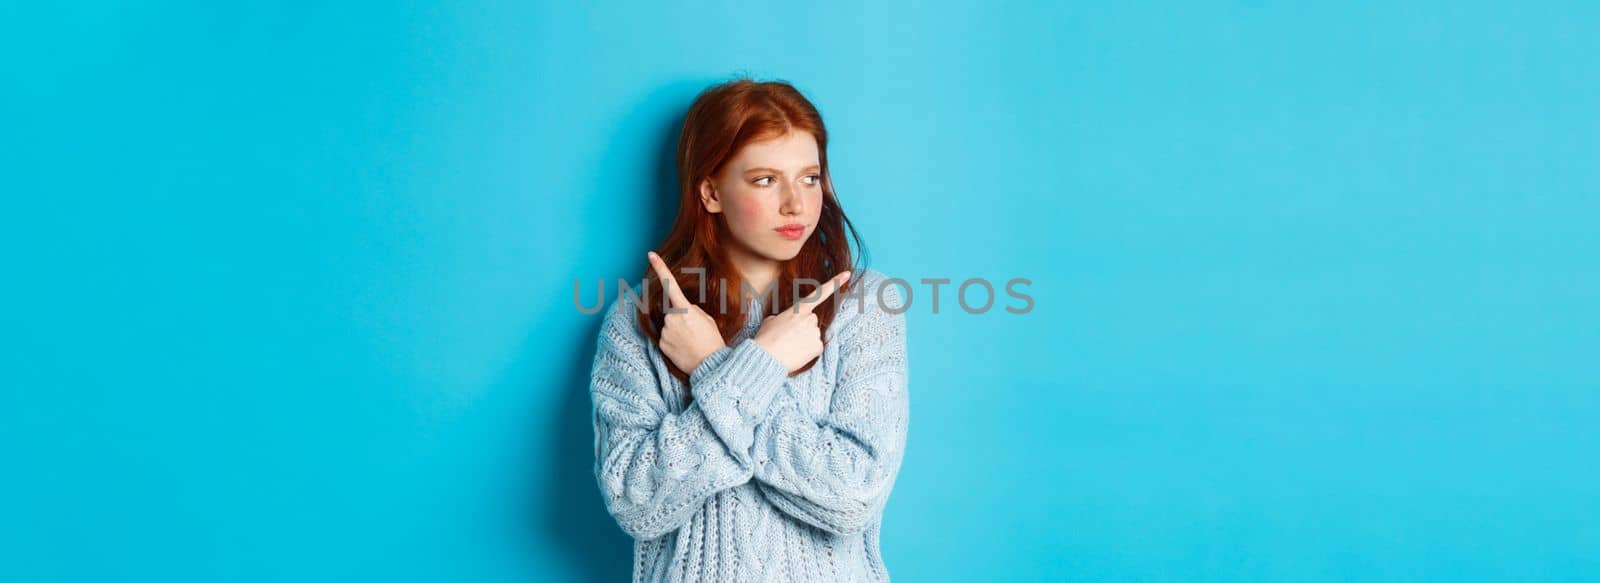 Indecisive redhead teenage girl making decision, pointing fingers sideways and looking left doubtful, standing in sweater against blue background.